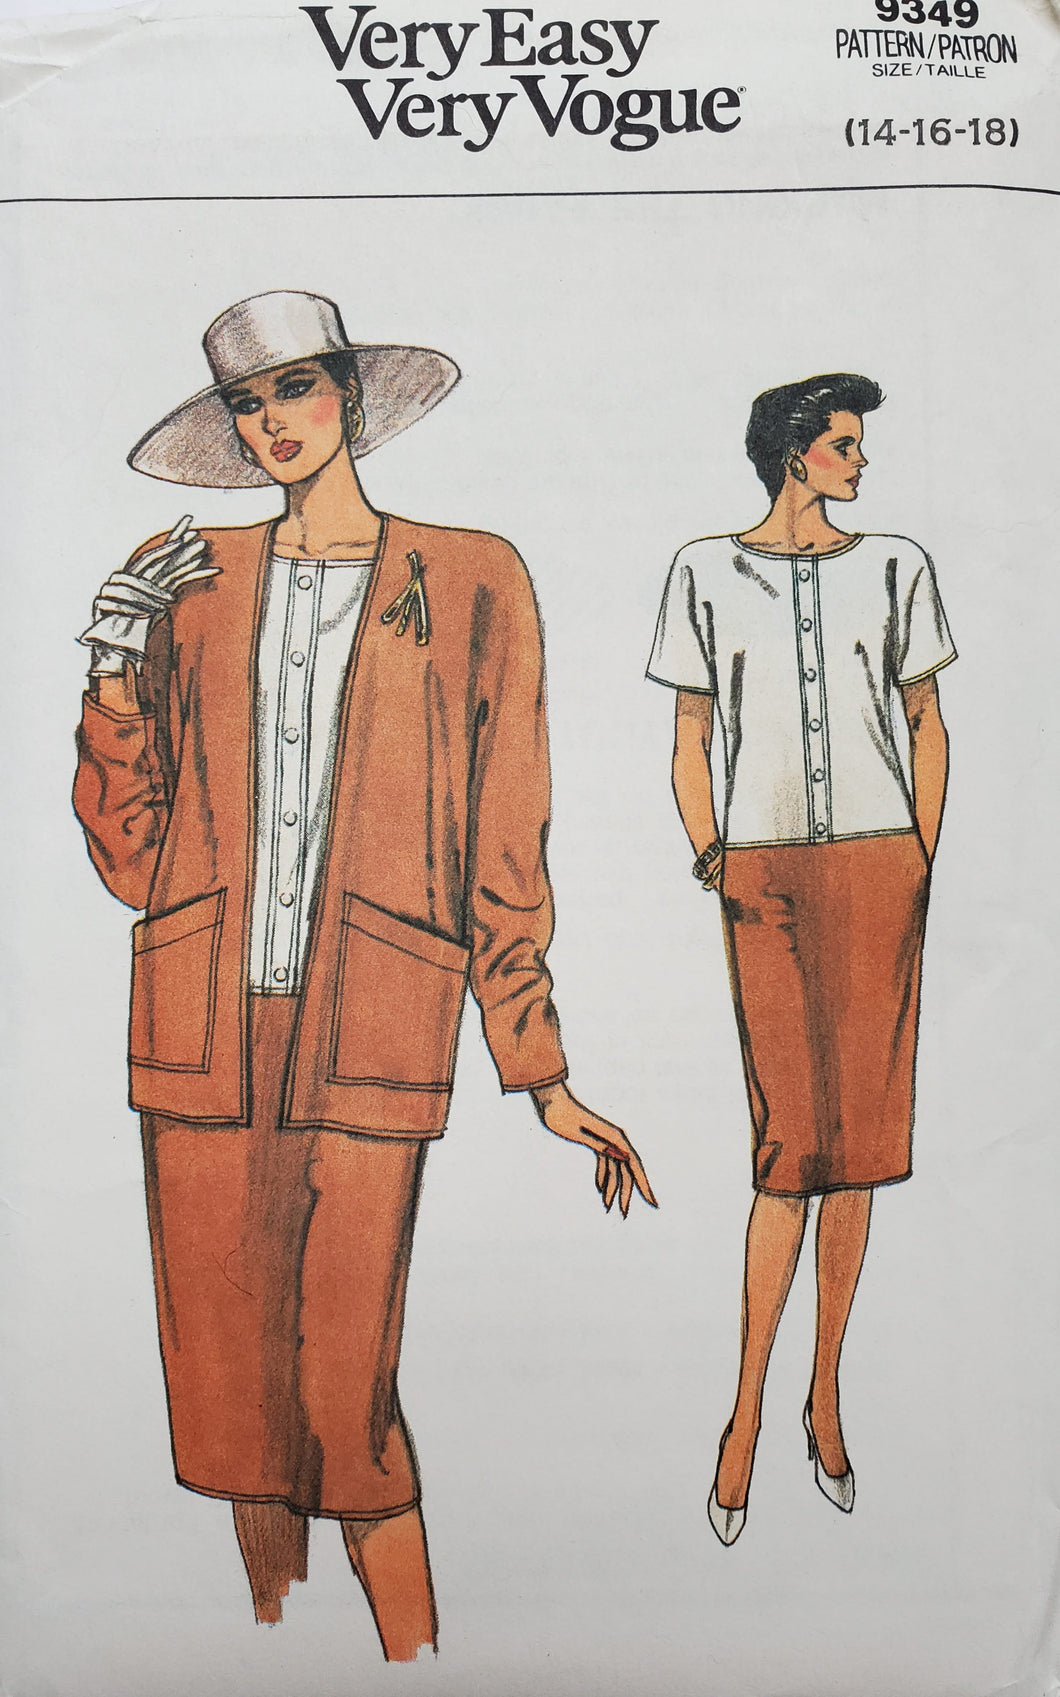 Vintage Vogue 9349, UNCUT Very Easy Very Vogue, Dress and Jacket, Sizes 14-16-18